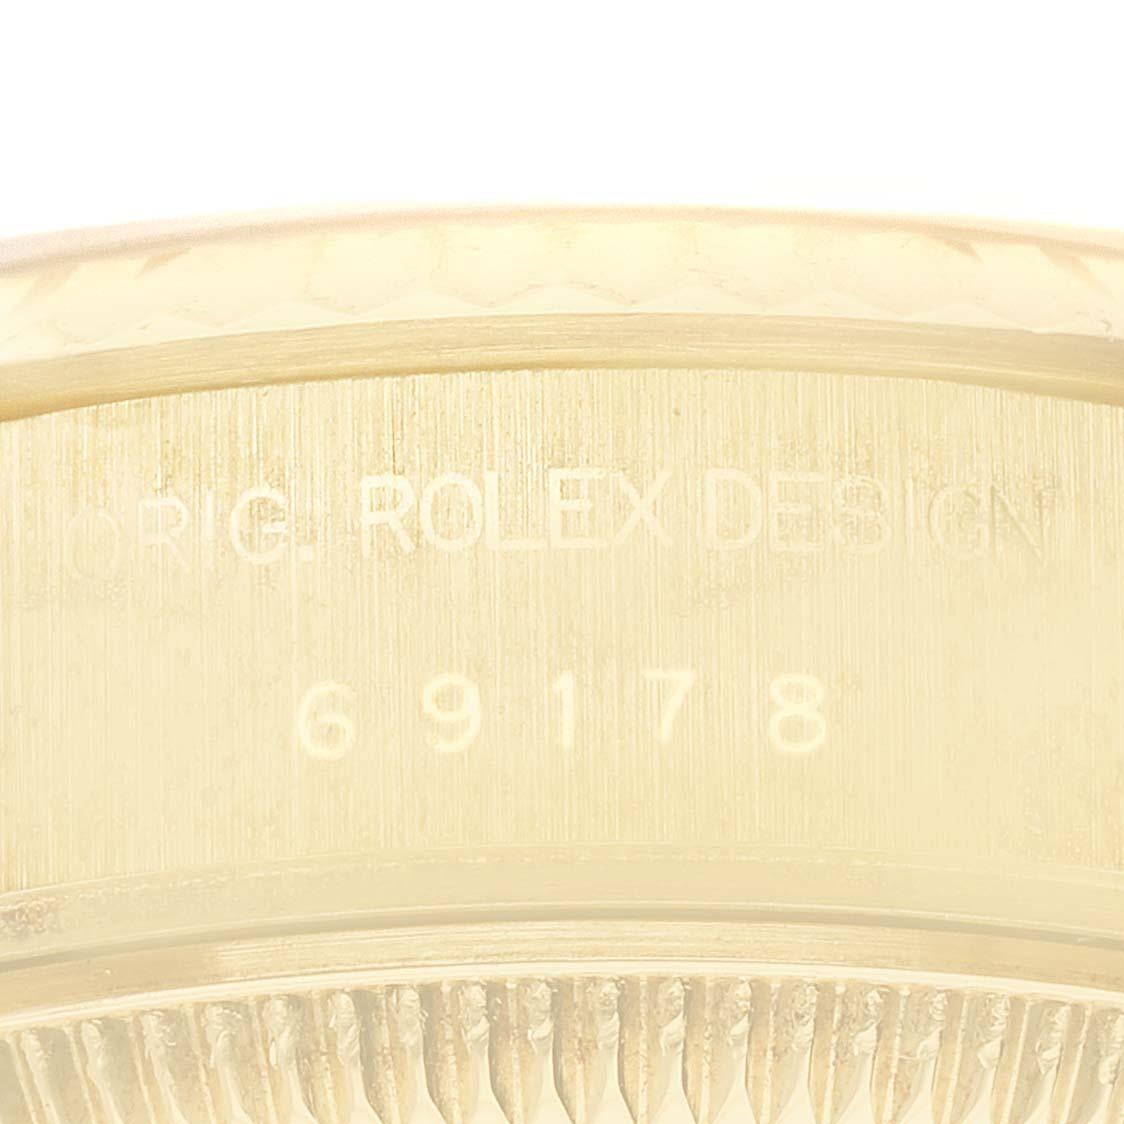 Rolex Datejust President Diamond Dial Yellow Gold Ladies Watch 69178 Box Papers. Officially certified chronometer automatic self-winding movement. 18k yellow gold oyster case 26.0 mm in diameter. Rolex logo on the crown. 18k yellow gold fluted